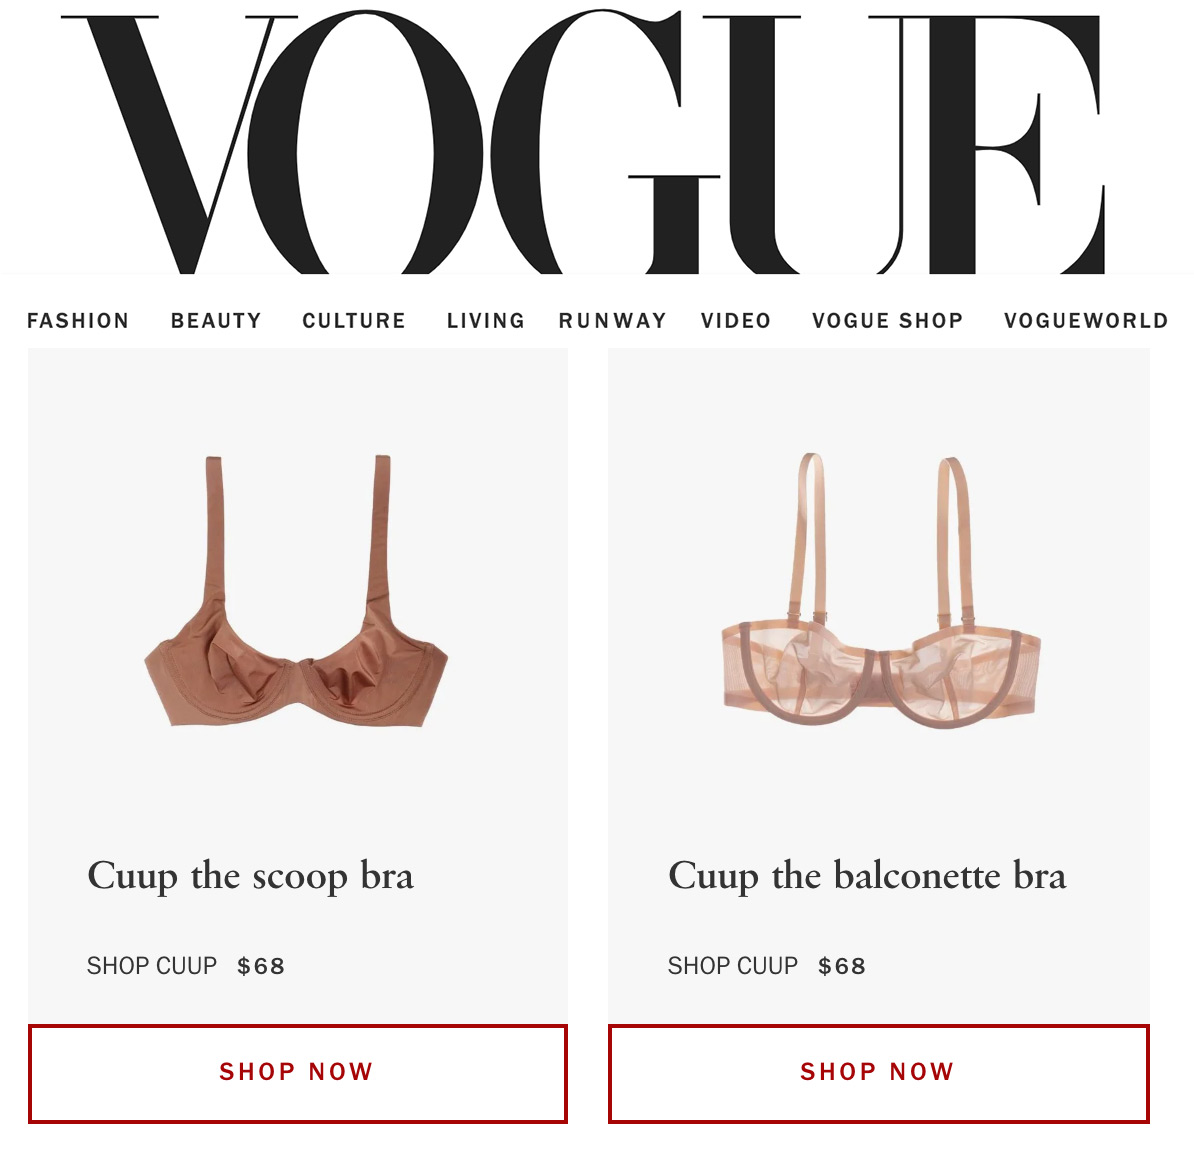 Vogue Is Loving on CUUP! - Stage 1 Financial